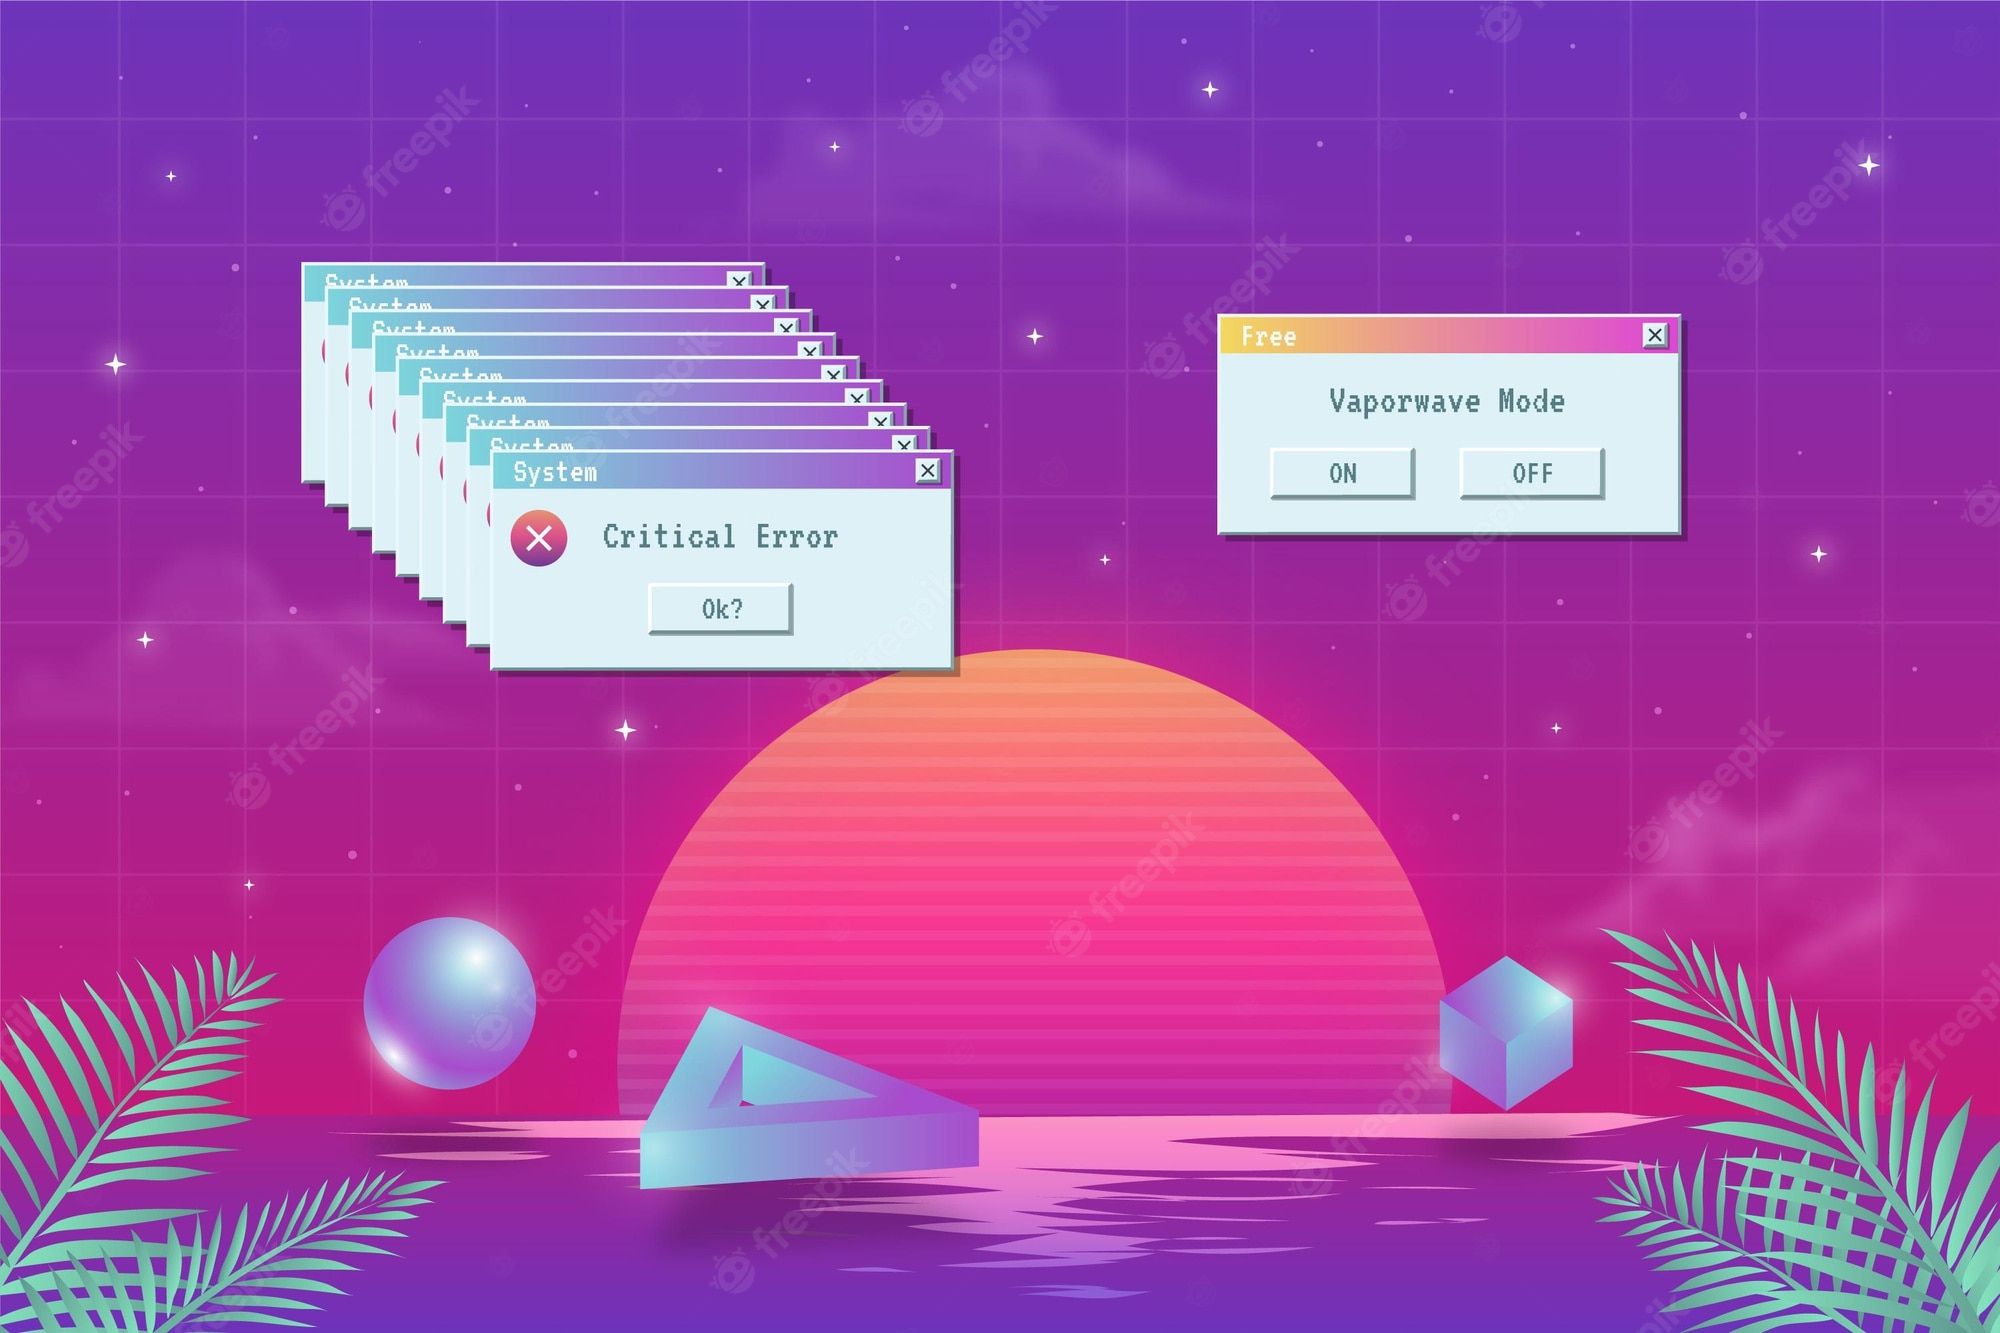 Vaporwave mode on a purple and pink gradient background with palm trees - Vaporwave